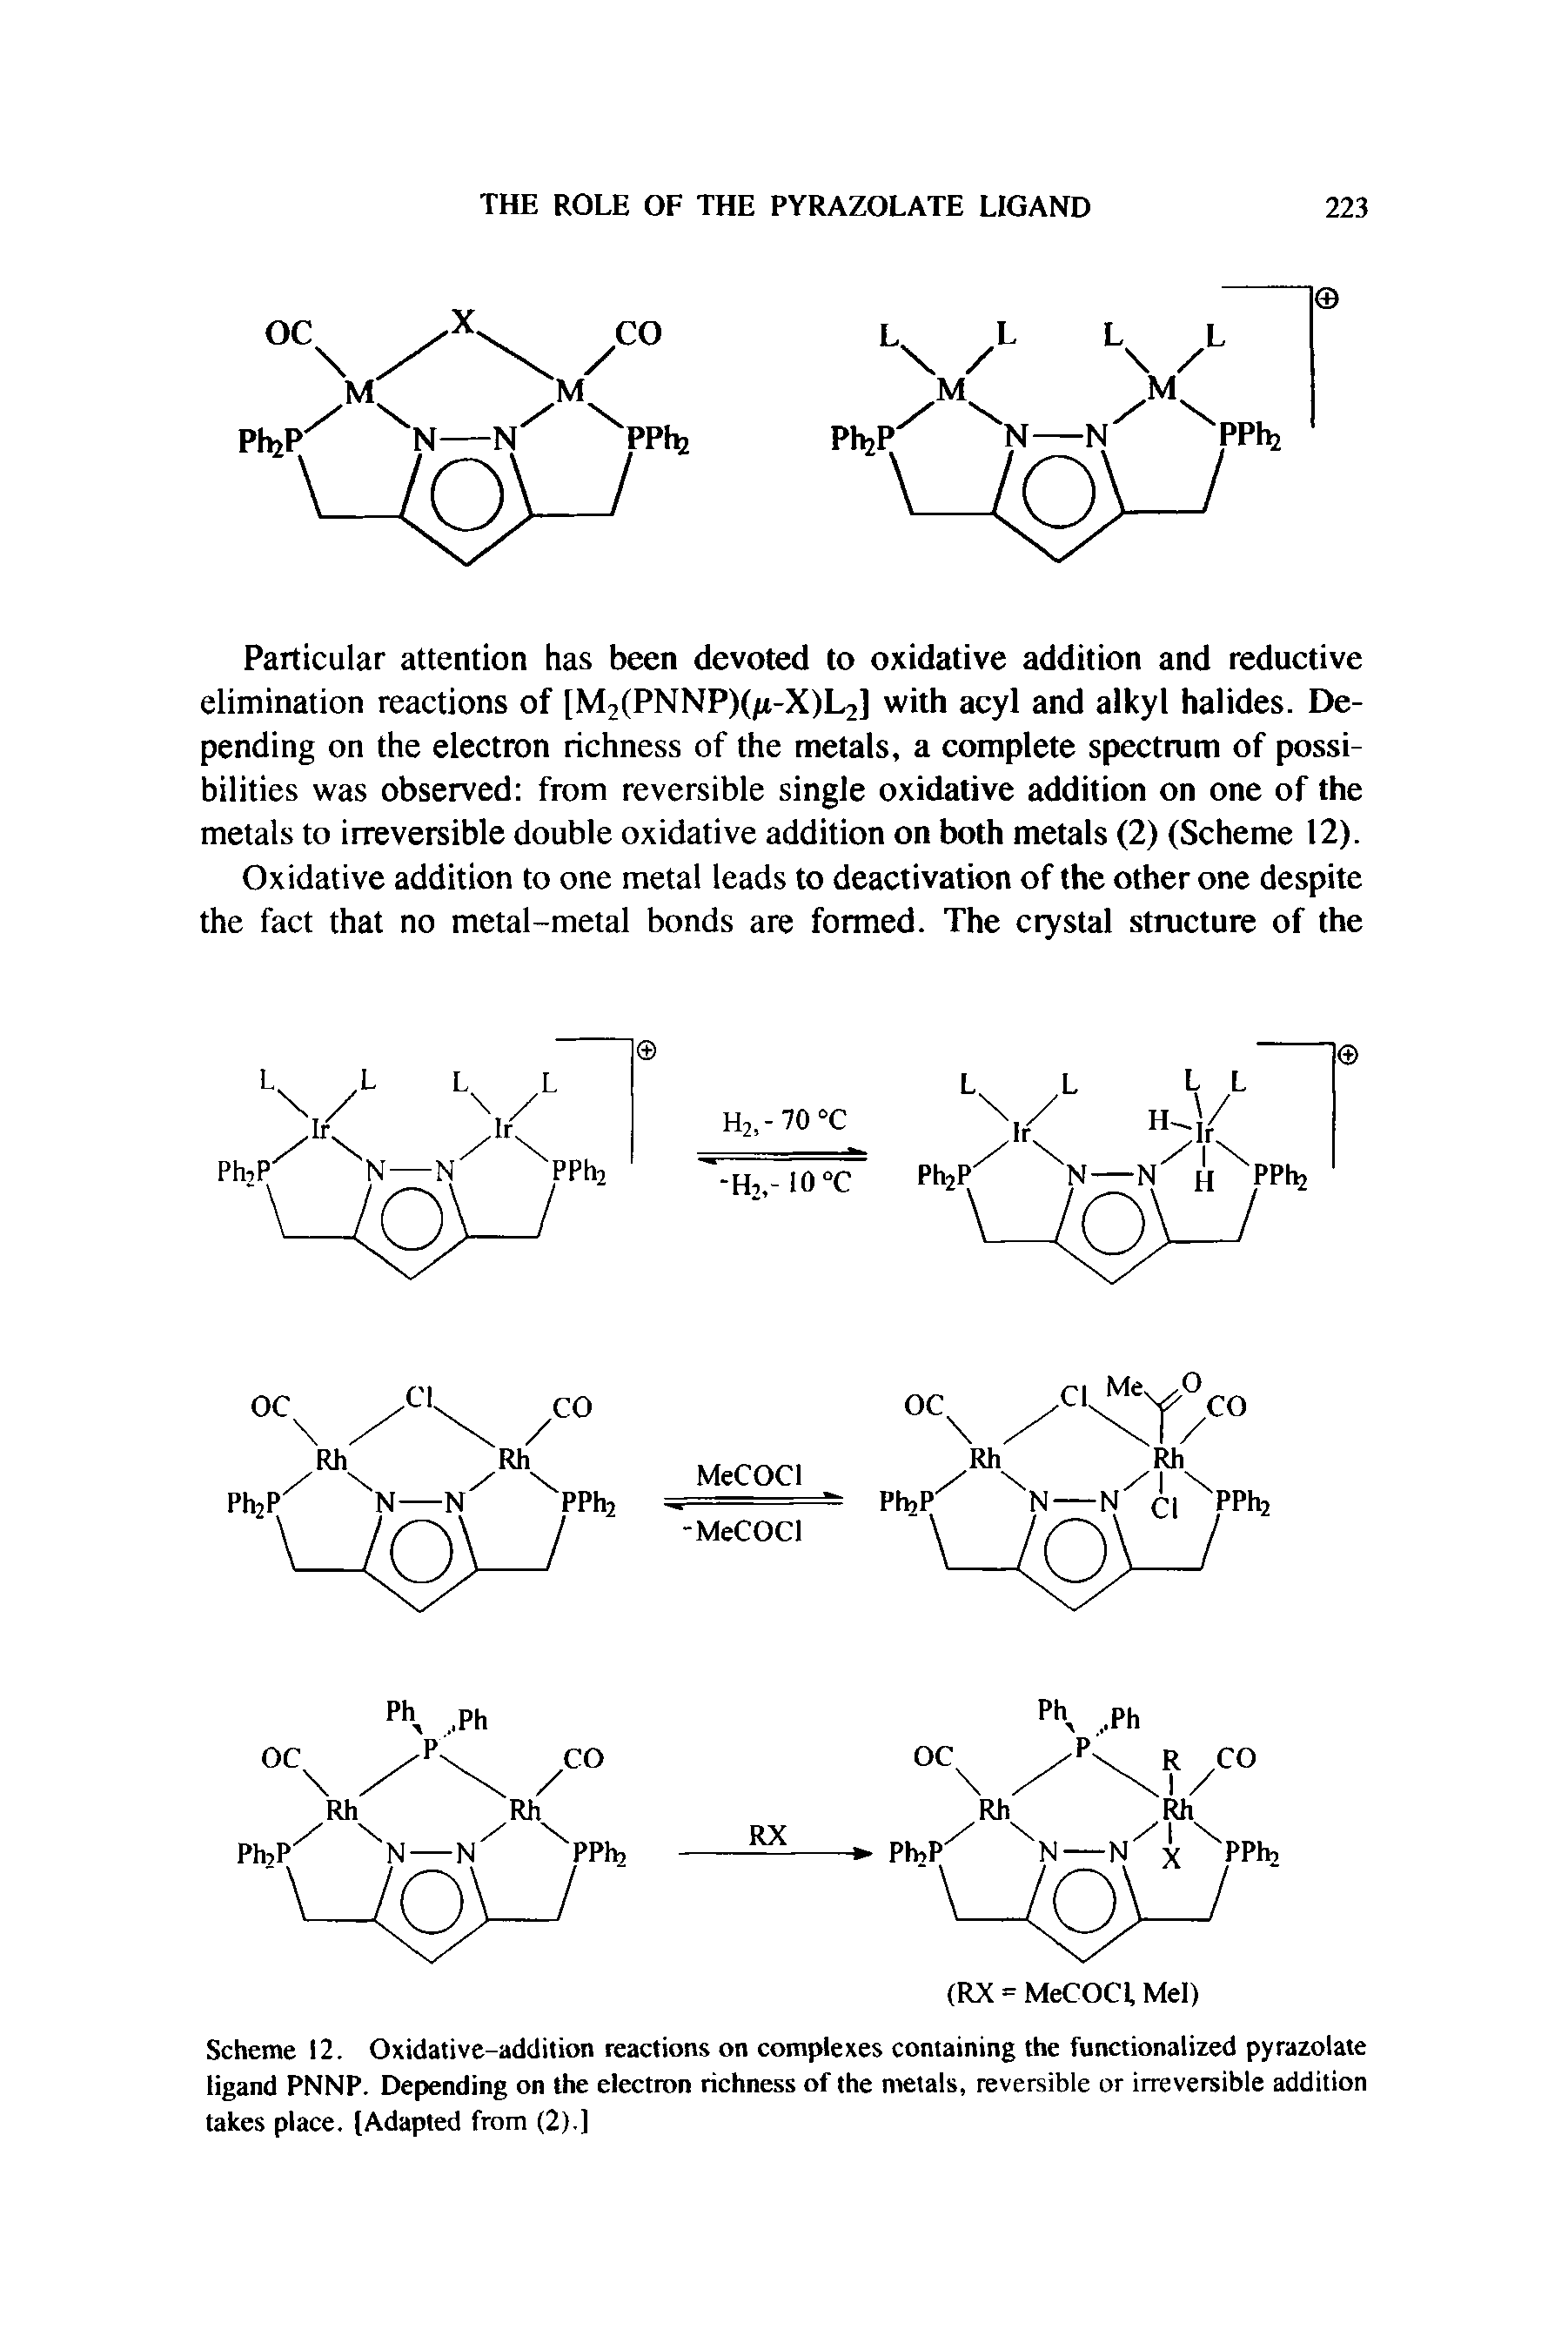 Scheme 12. Oxidative-addition reactions on complexes containing the functionalized pyrazolate ligand PNNP. Depending on the electron richness of the metals, reversible or irreversible addition takes place. (Adapted from (2).]...